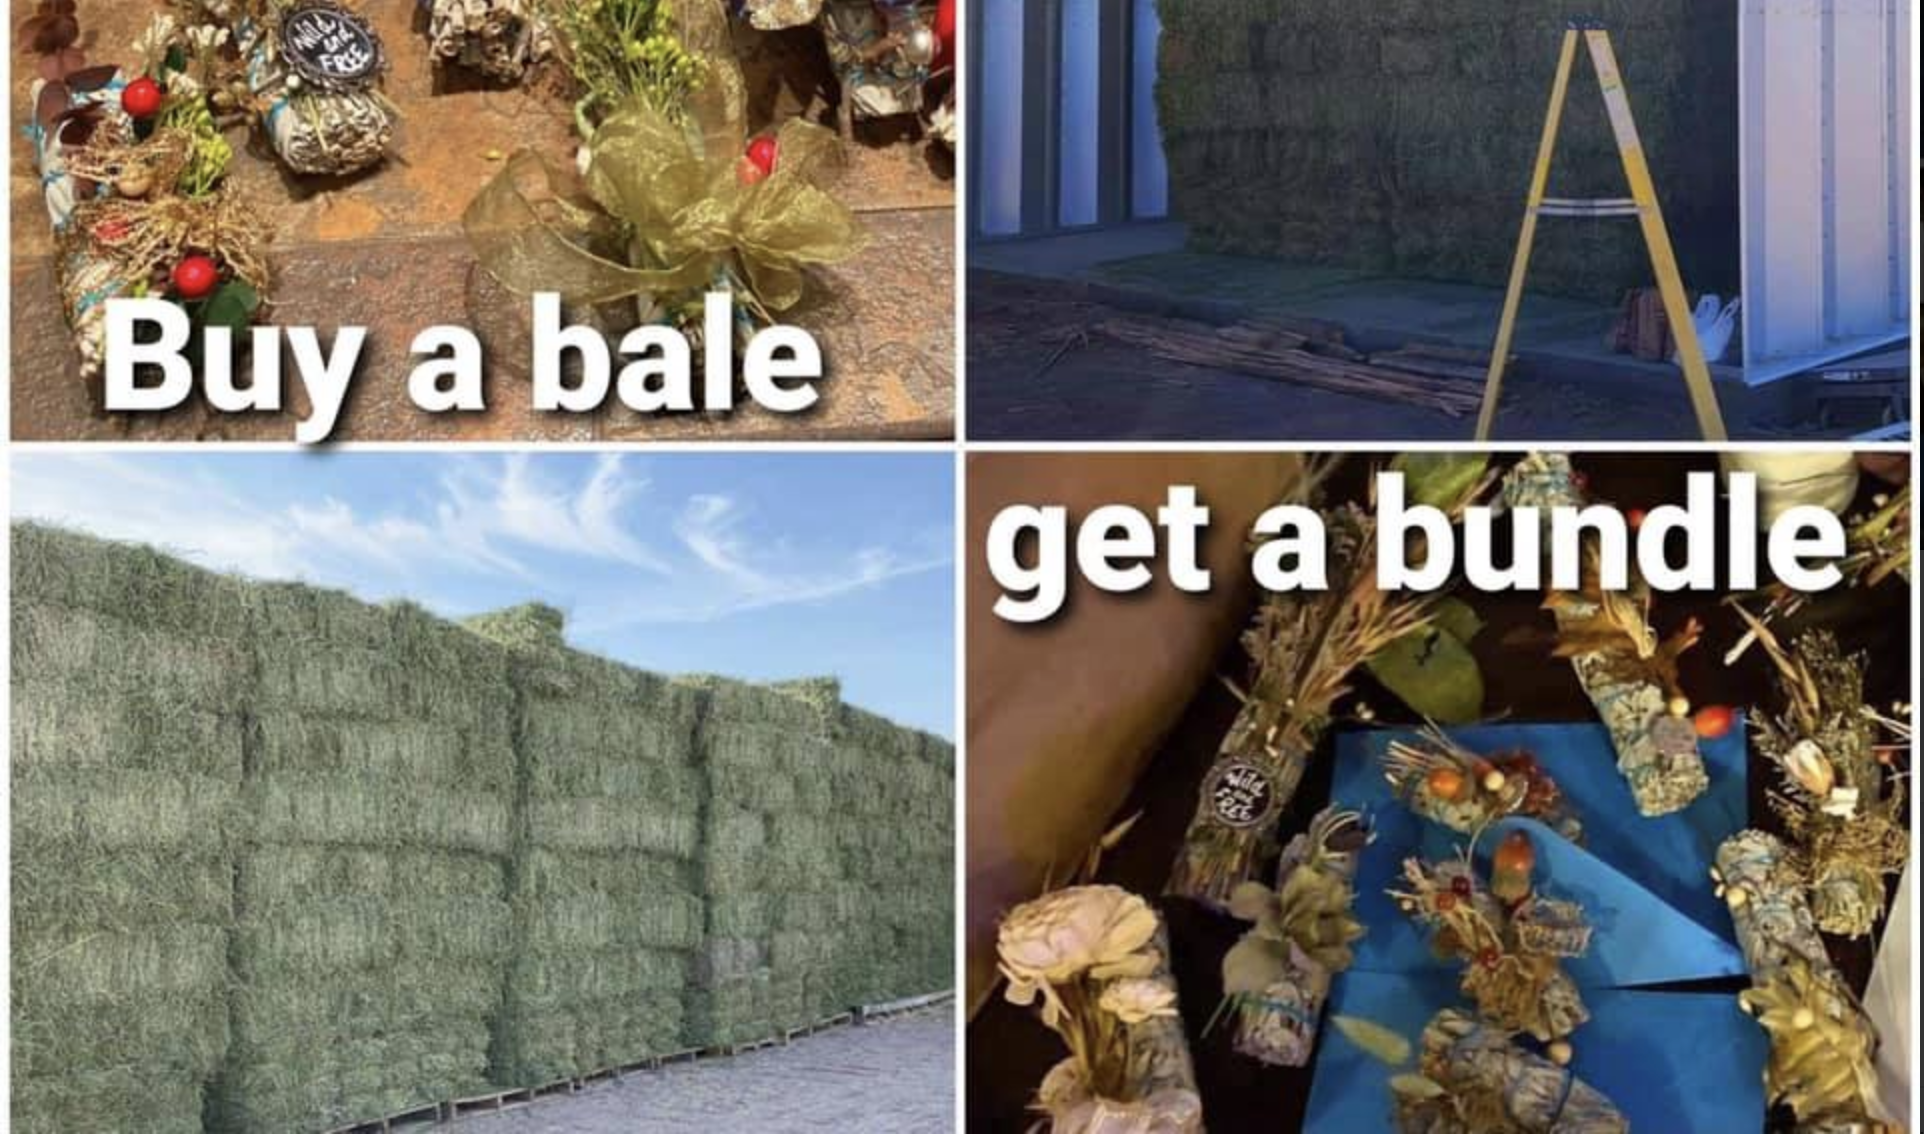 Buy a Bale (of hay) and you’ll get a Bundle (of natural sage or flowers)!